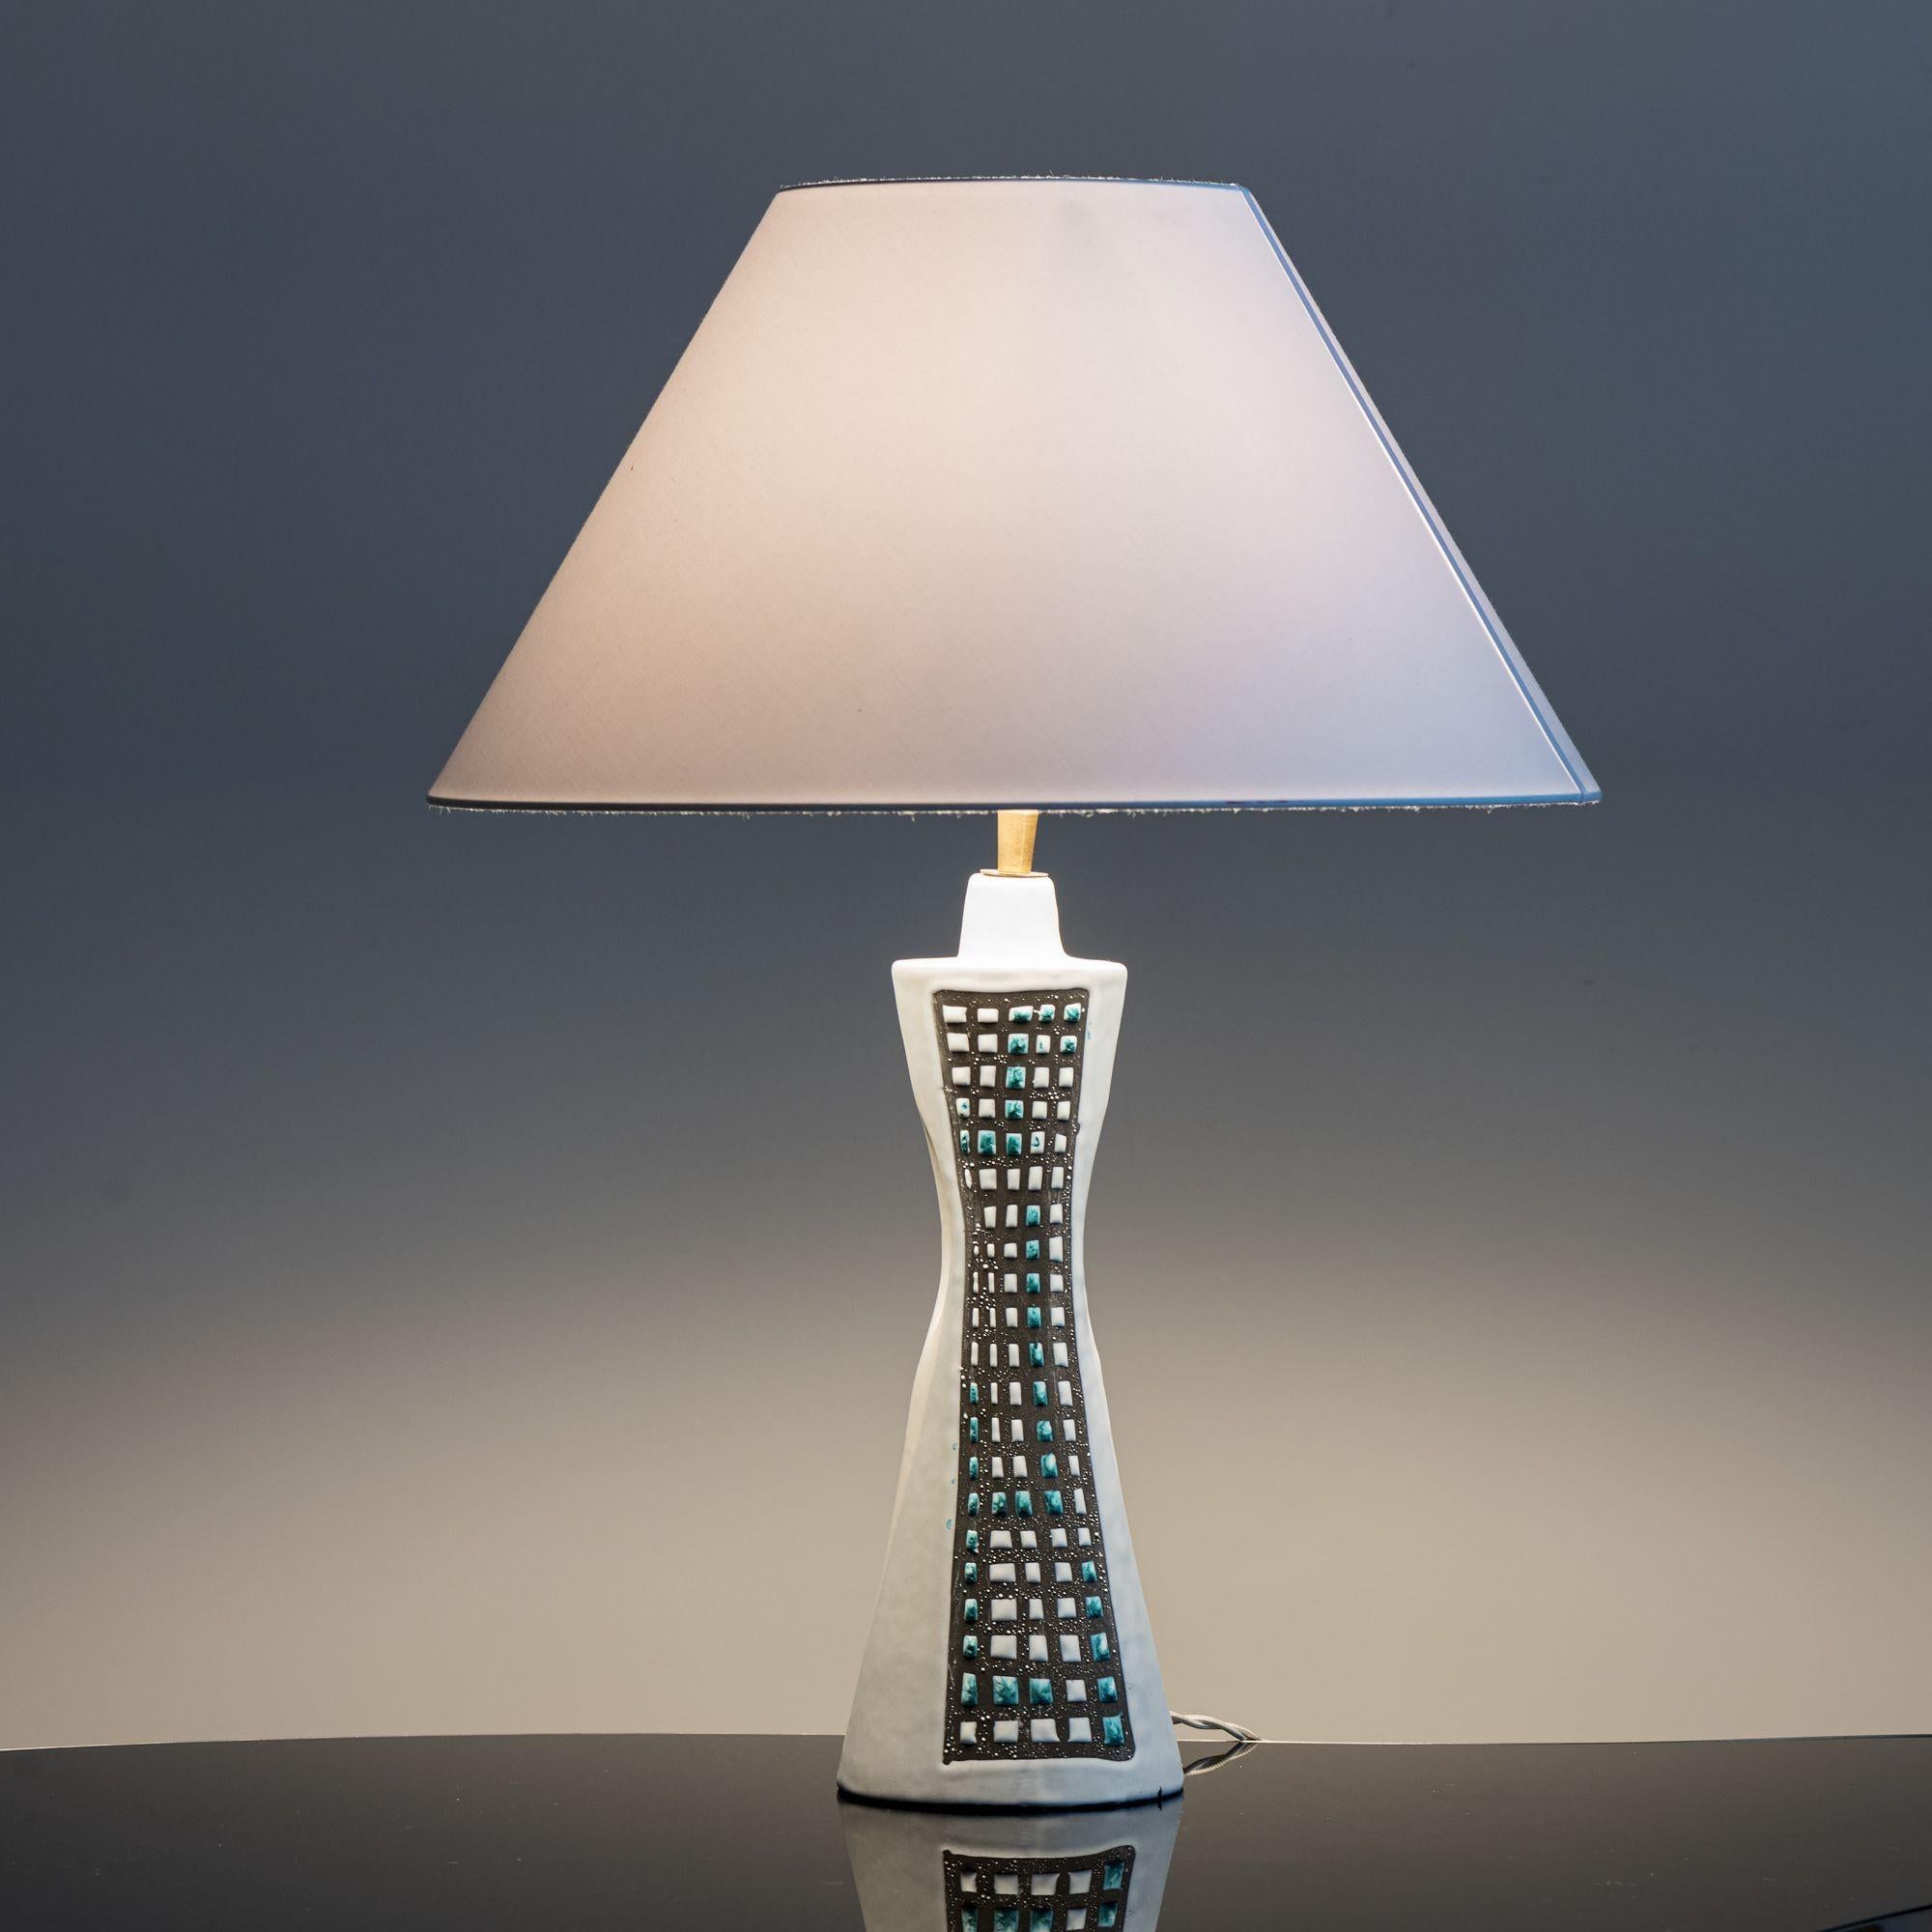 A classic Capron lamp in Pajama pattern from Vallauris, France, 1960s.

Listed dimensions are for lamp alone. Comes with a linen shade Height 9.5